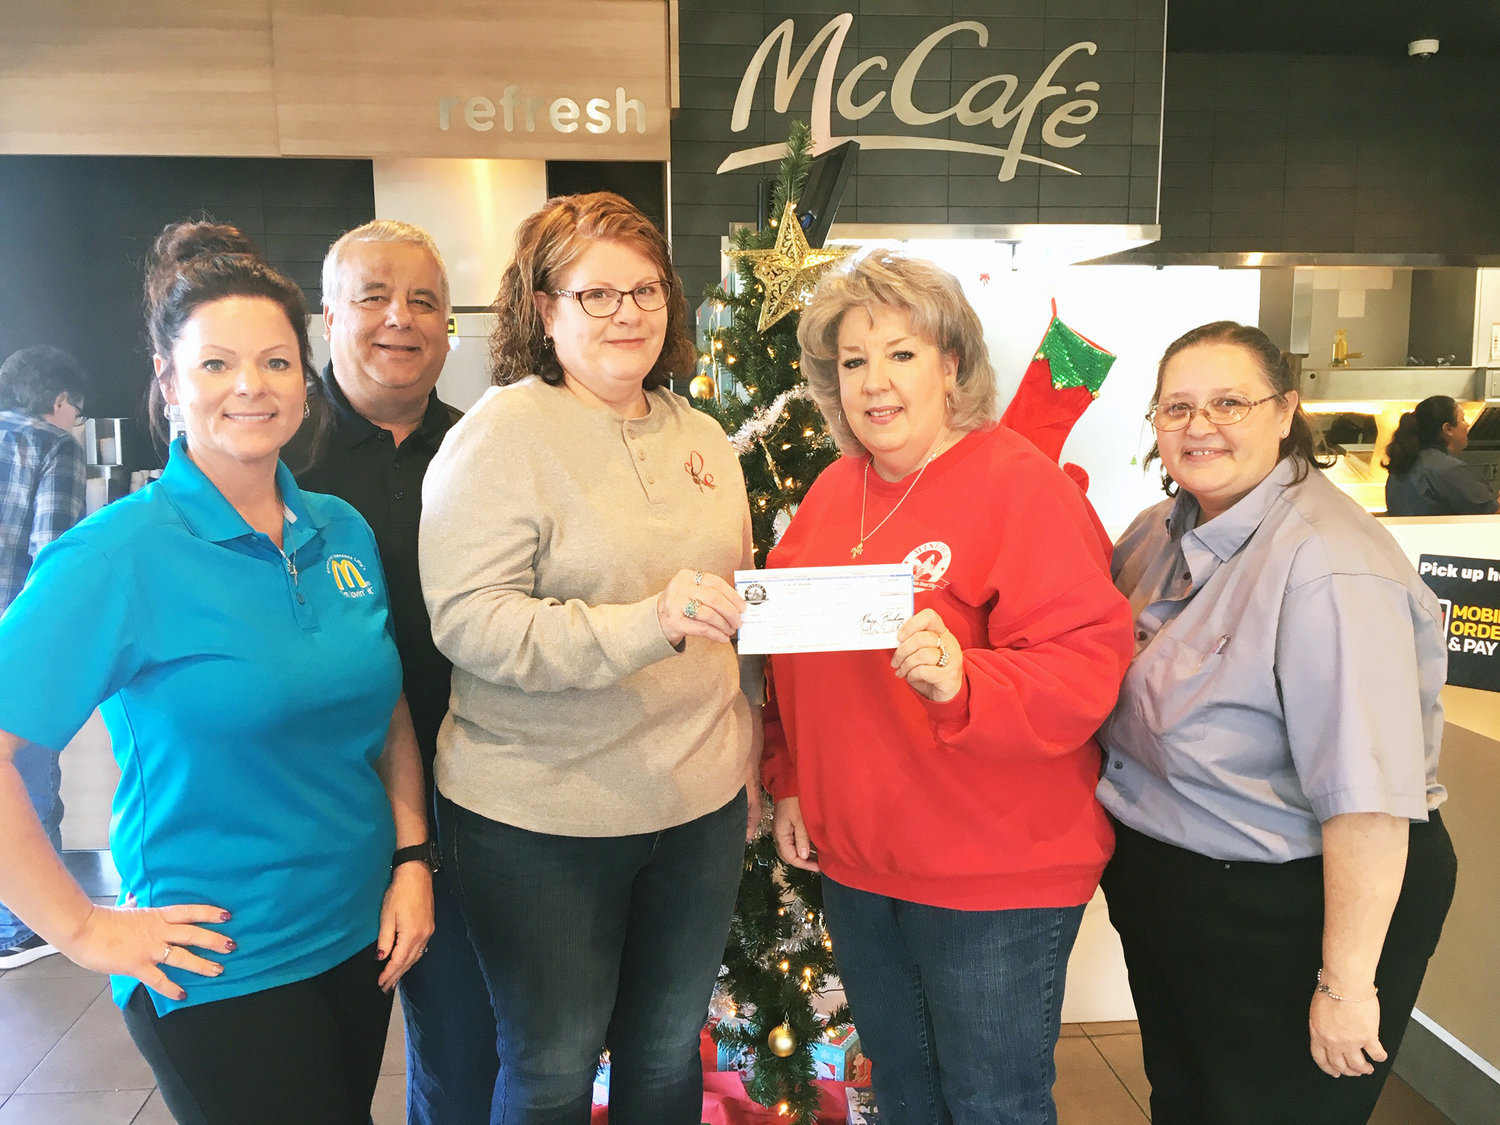 Bernadine Corley, center left, accepts a $200 check from Mineola Main Street Board Secretary Pat Hamlett. Corley was the week four winner in the Shop Local campaign to promote Mineola businesses, and her winning receipt was for a purchase made at McDonald’s. McDonald’s owner Kevin Lilly of Athens; public relations person Berta Winn, far left, and manager Tina Kneitz were present for the occasion.